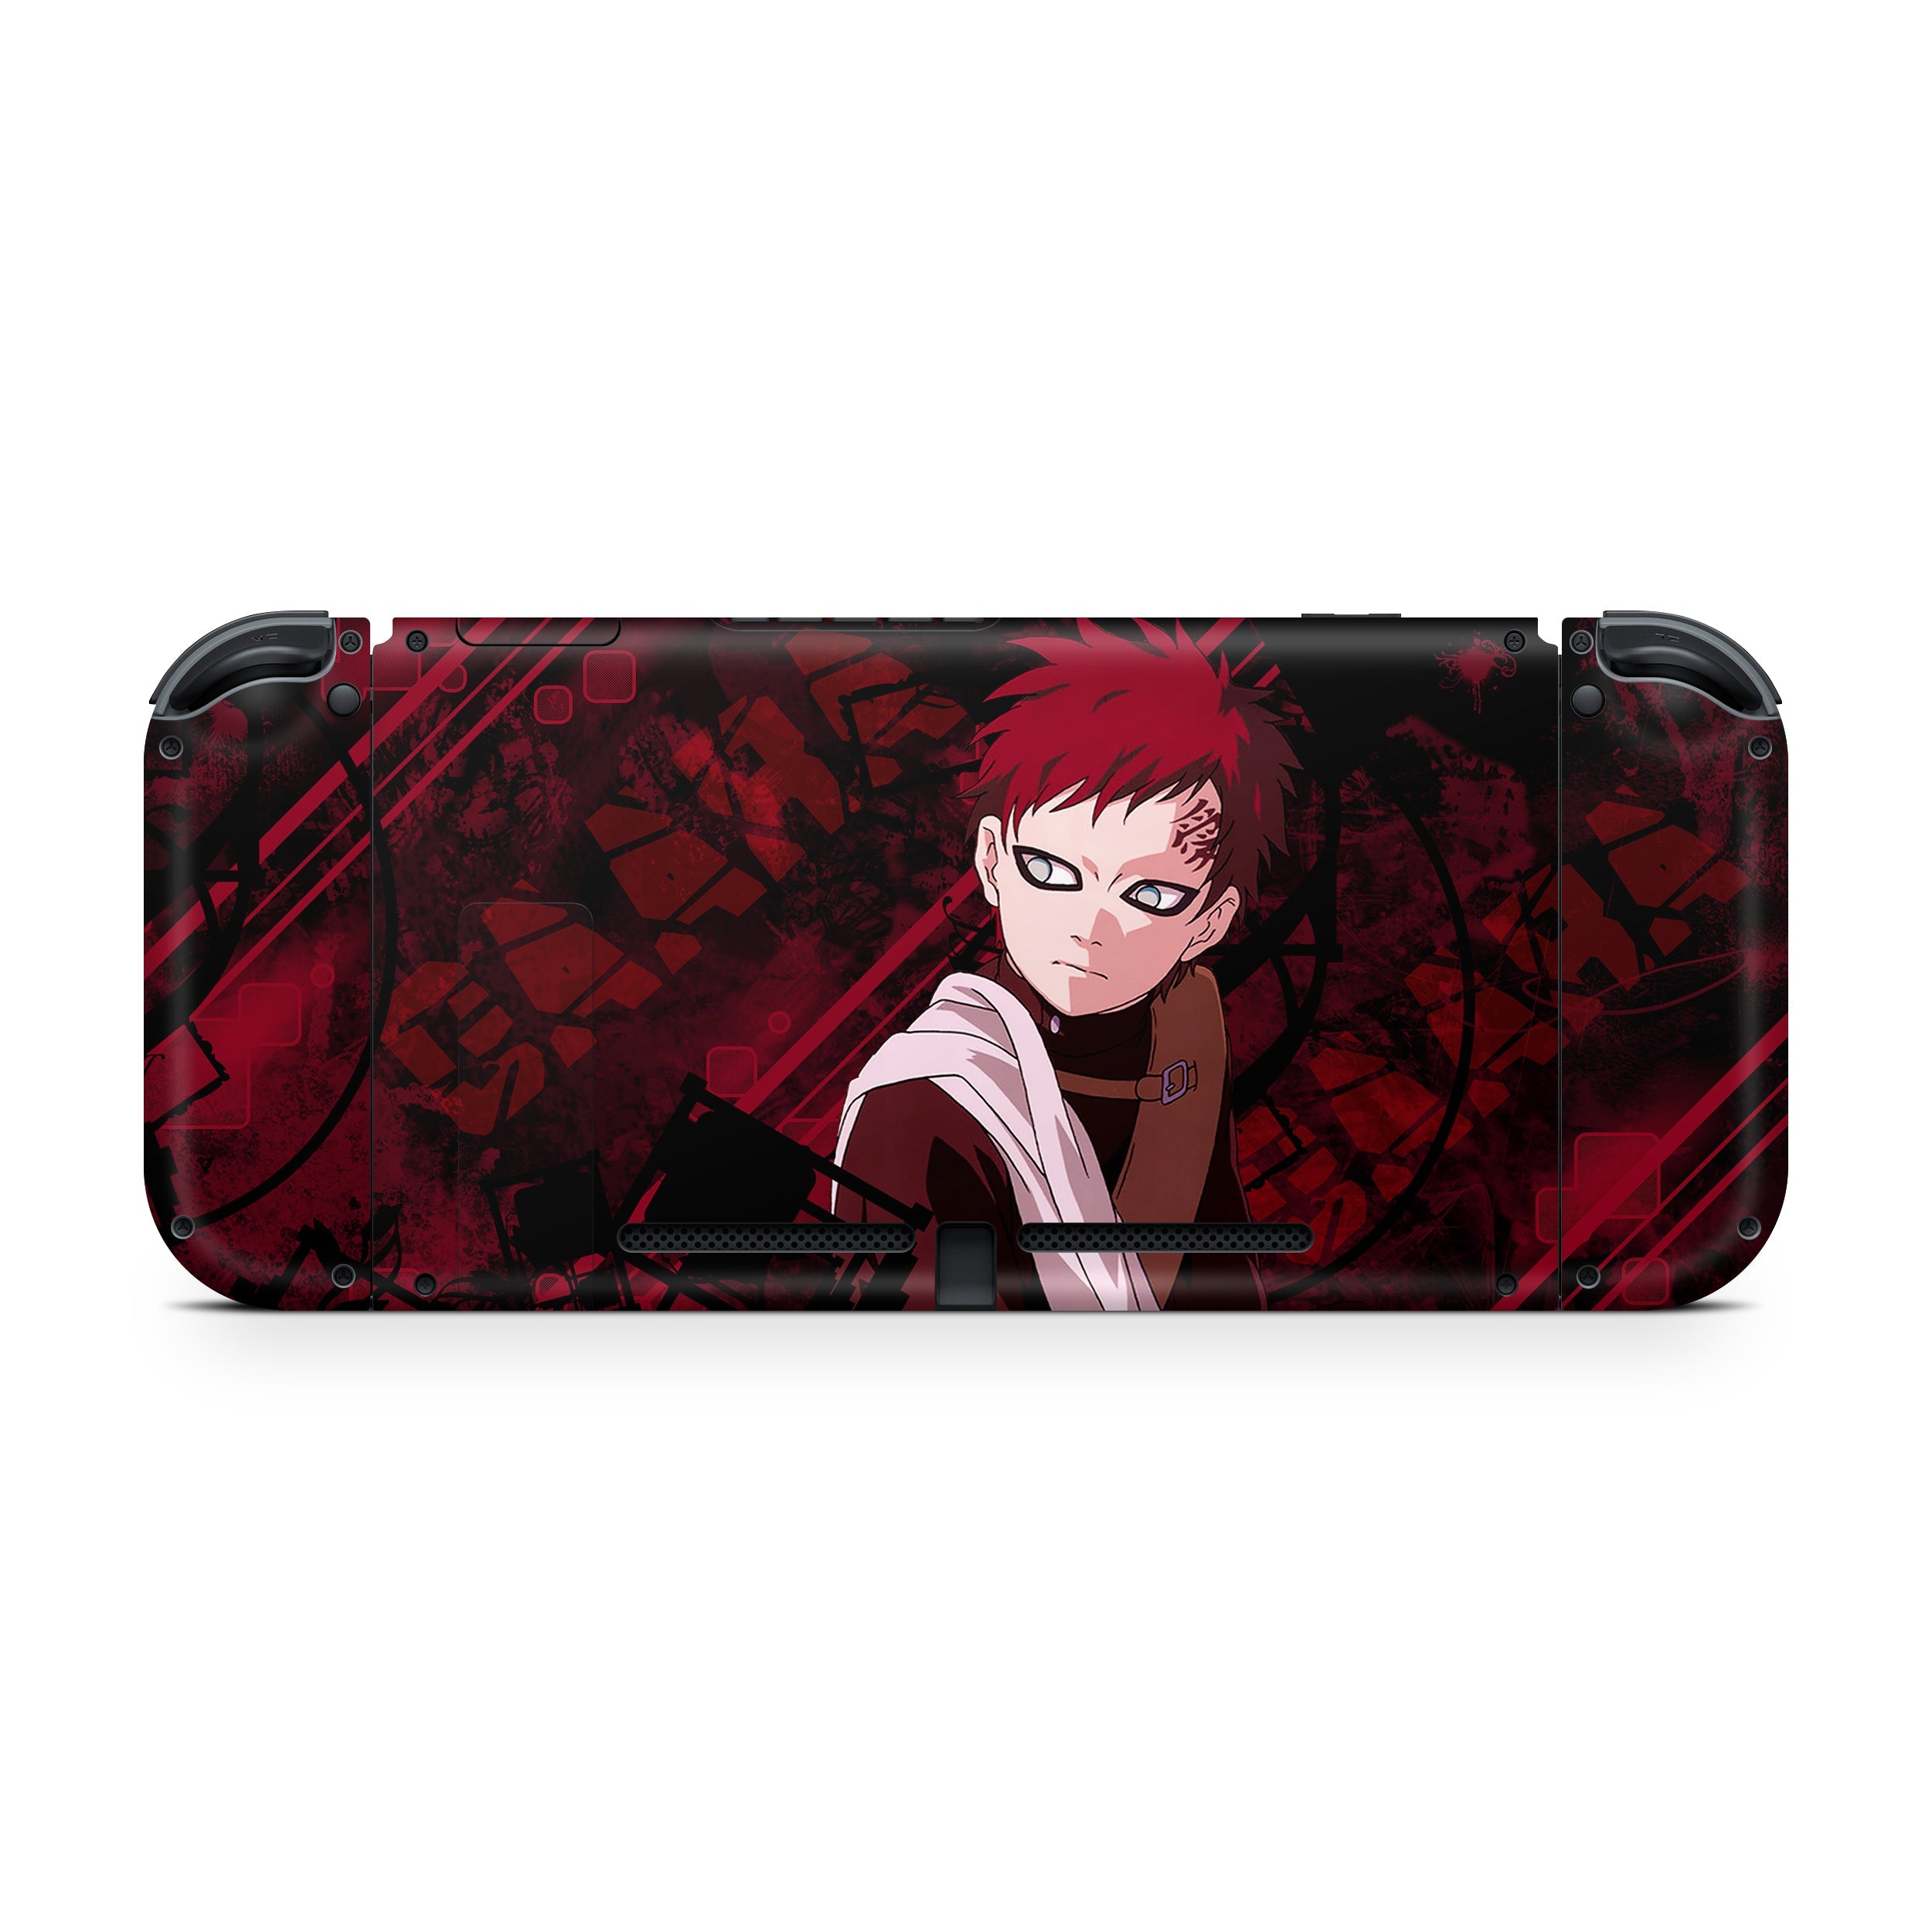 A video game skin featuring a Naruto Gaara design for the Nintendo Switch.